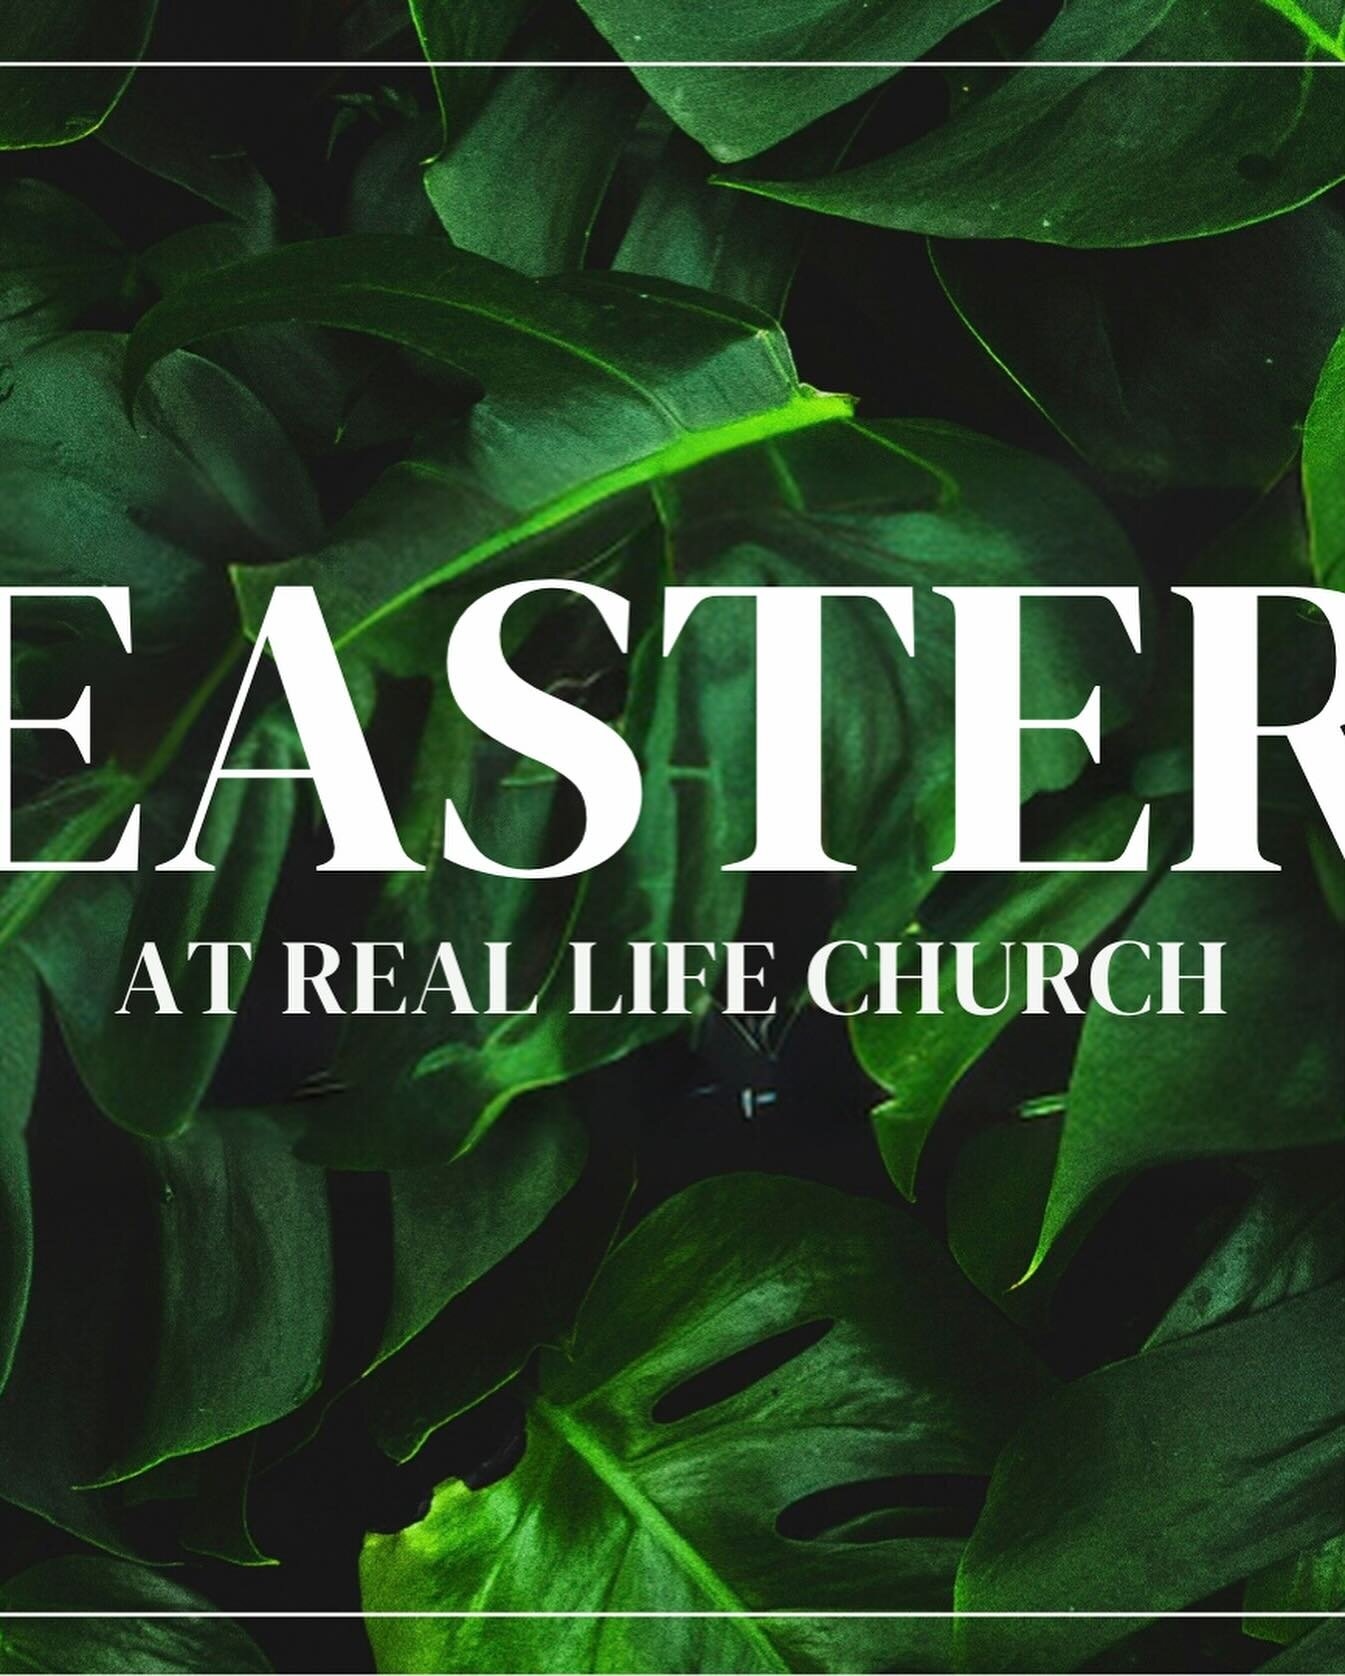 T- Minus 10 days til Easter&hellip;

Easter is coming up and we need YOUR help! Grab your friends, your family and sign up to serve! Link is in the bio. 

Easter Services: 
4/28: 7pm 
4/30: 3pm &amp; 5pm 
4/31: 7am, 8:30am, 10am, &amp; 11:30am 

We h